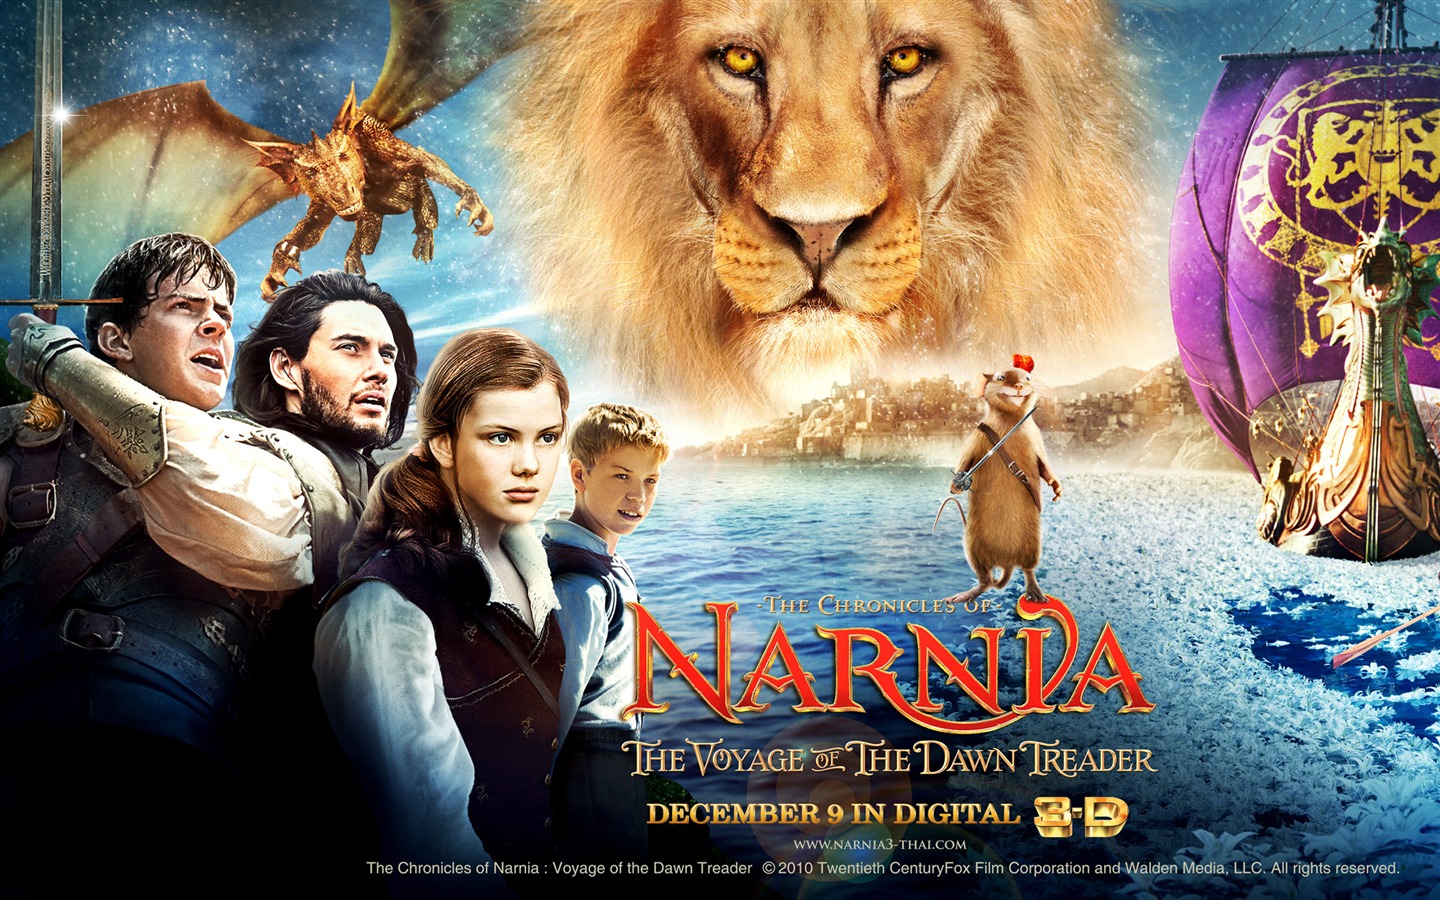 The Chronicles of Narnia: The Voyage of the Dawn Treader wallpapers #14 - 1440x900